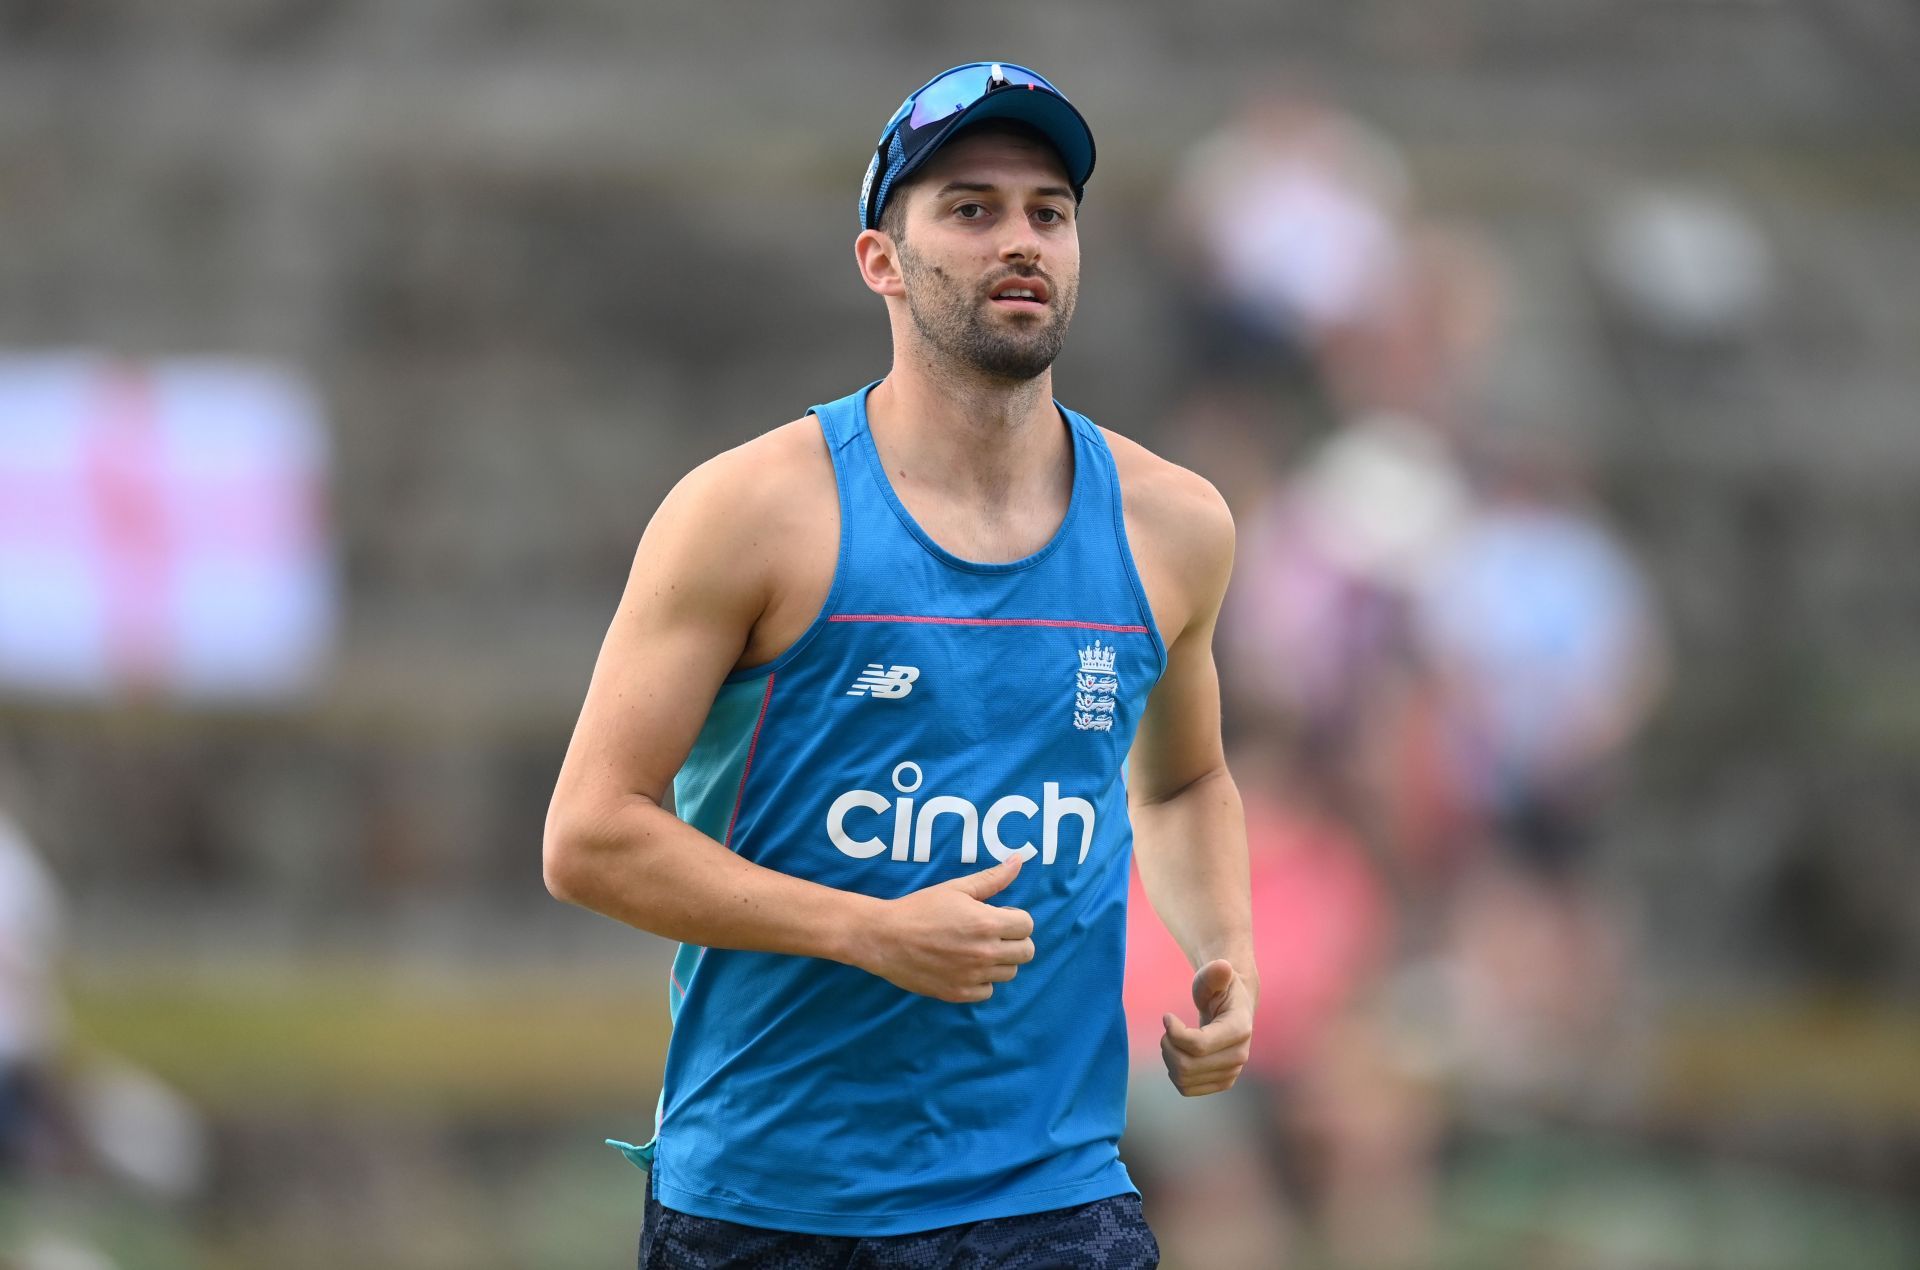 Mark Wood became the third player to be ruled out of IPL 2022